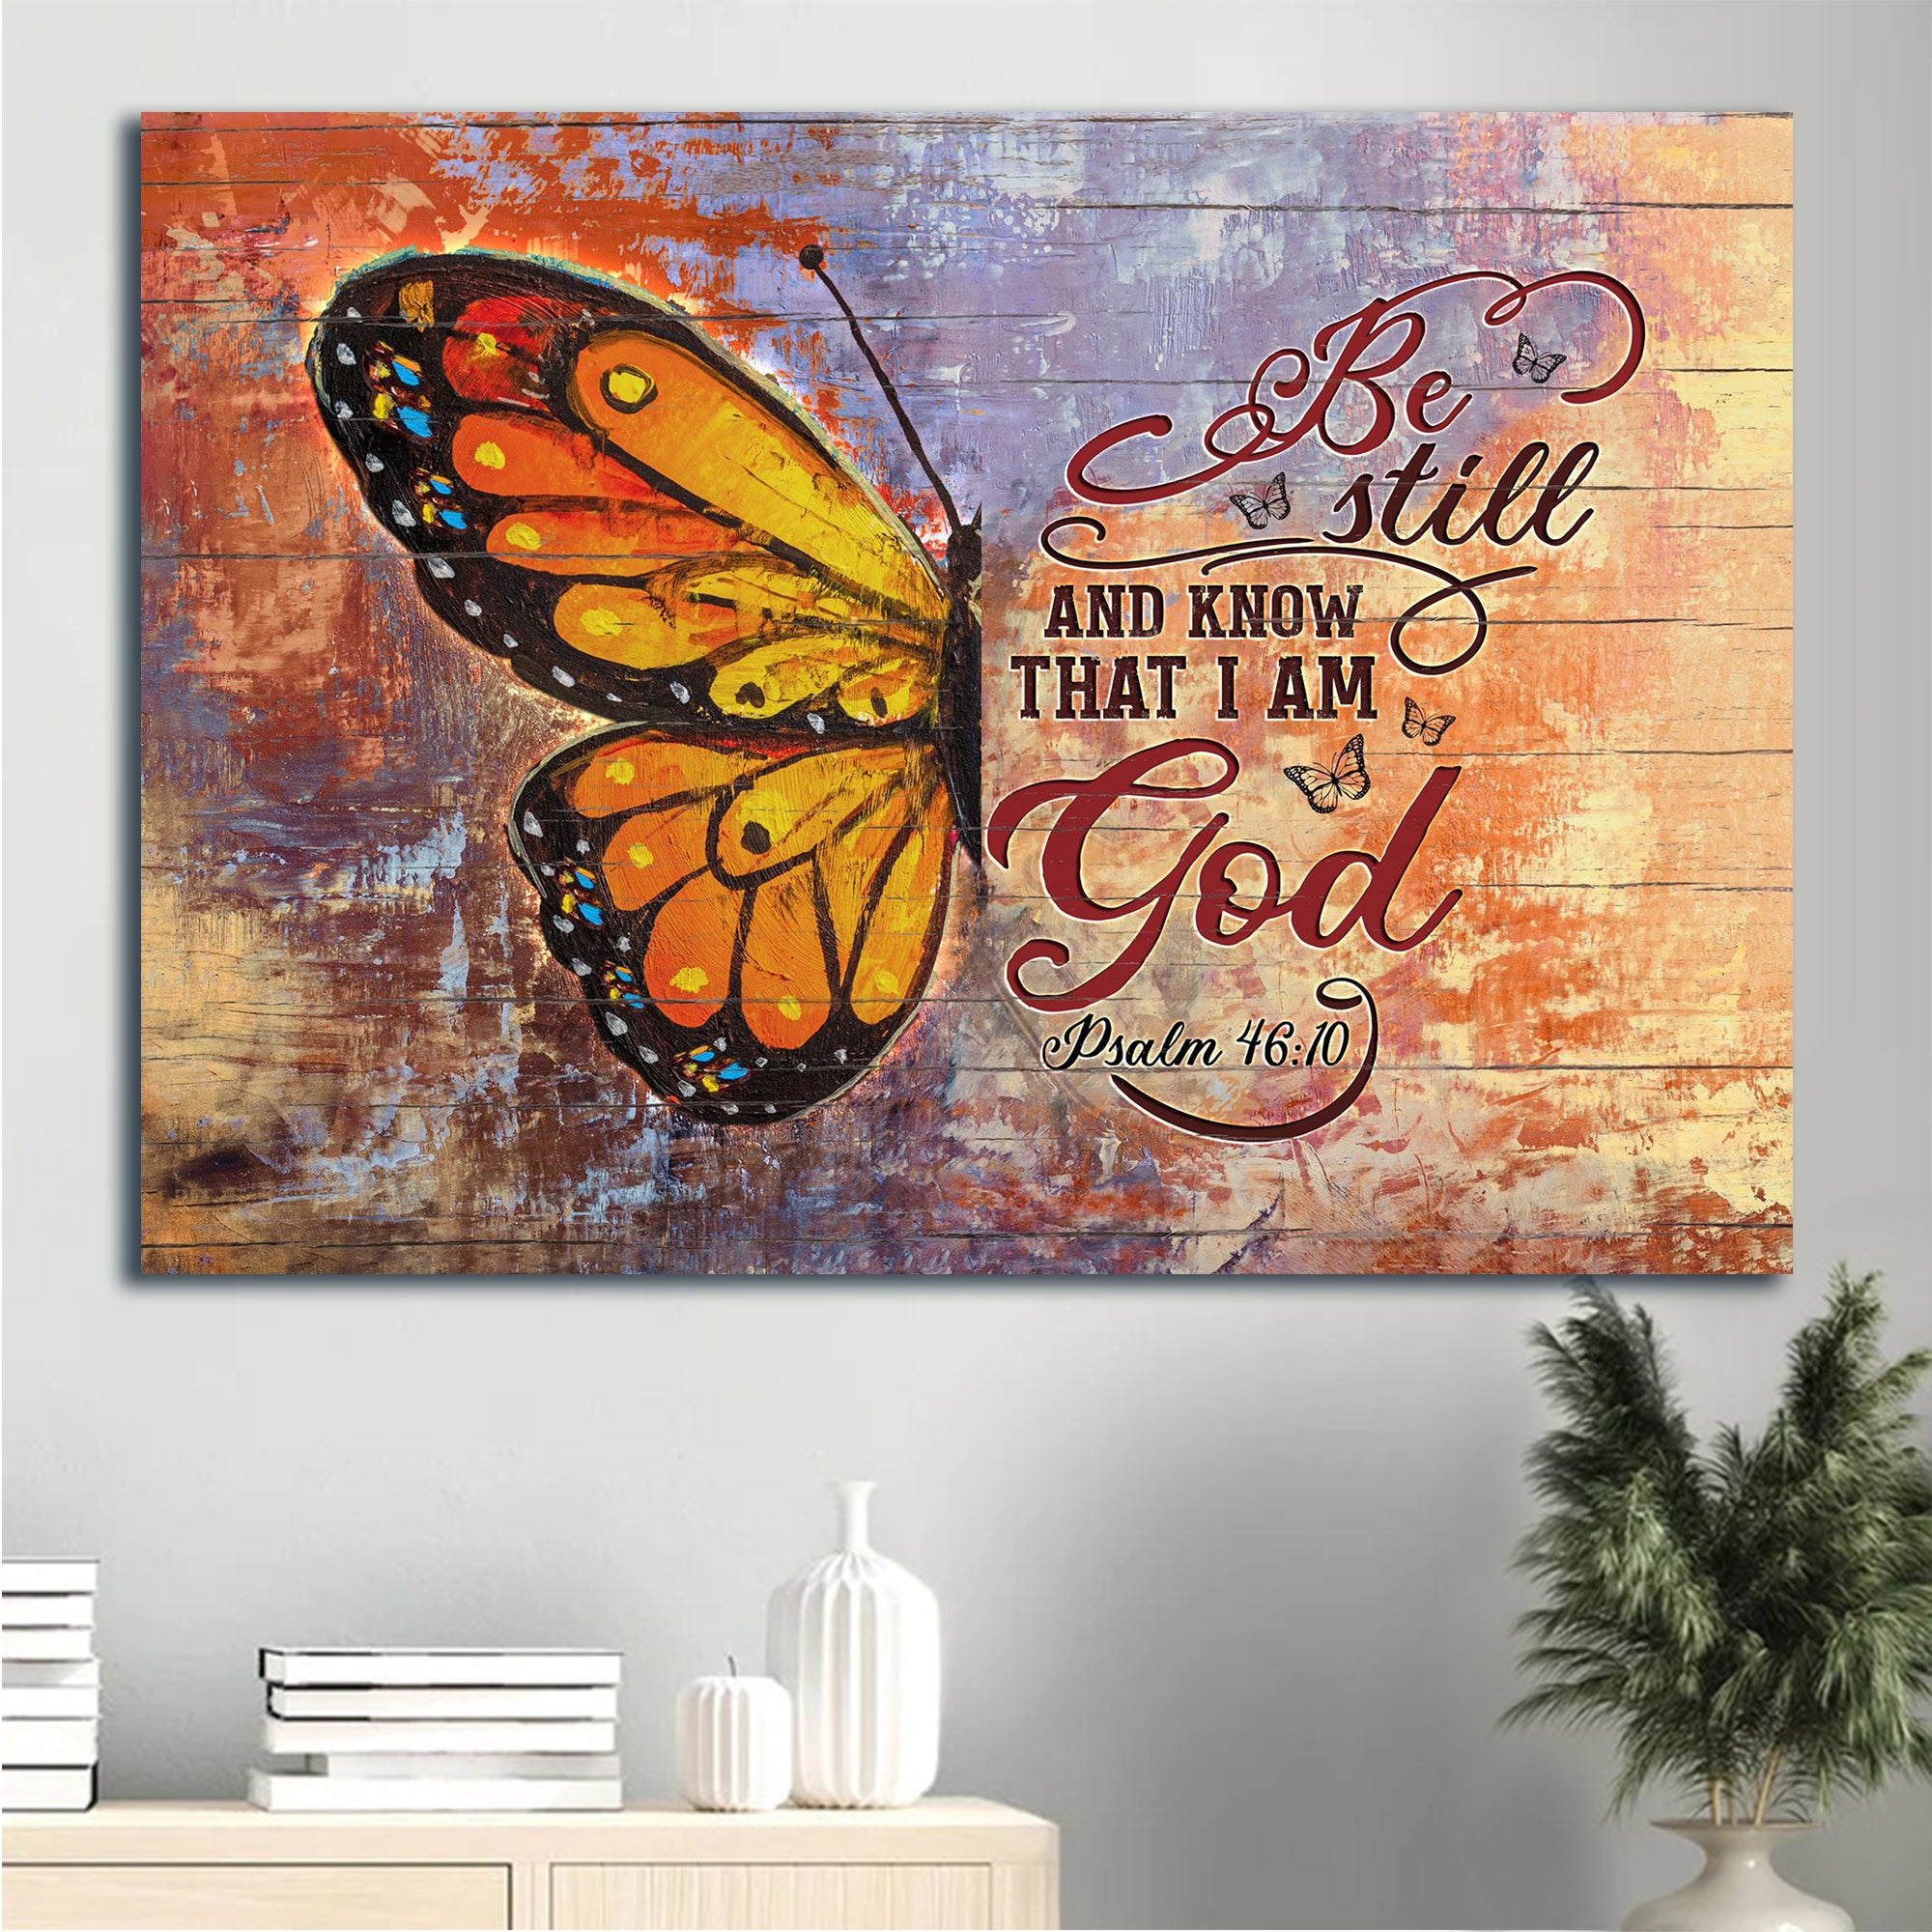 Jesus Landscape Canvas - Brilliant butterfly, Colorful back ground Canvas- Gift for Christian- Be still and know that I am God  - Landscape canvas, Wall art